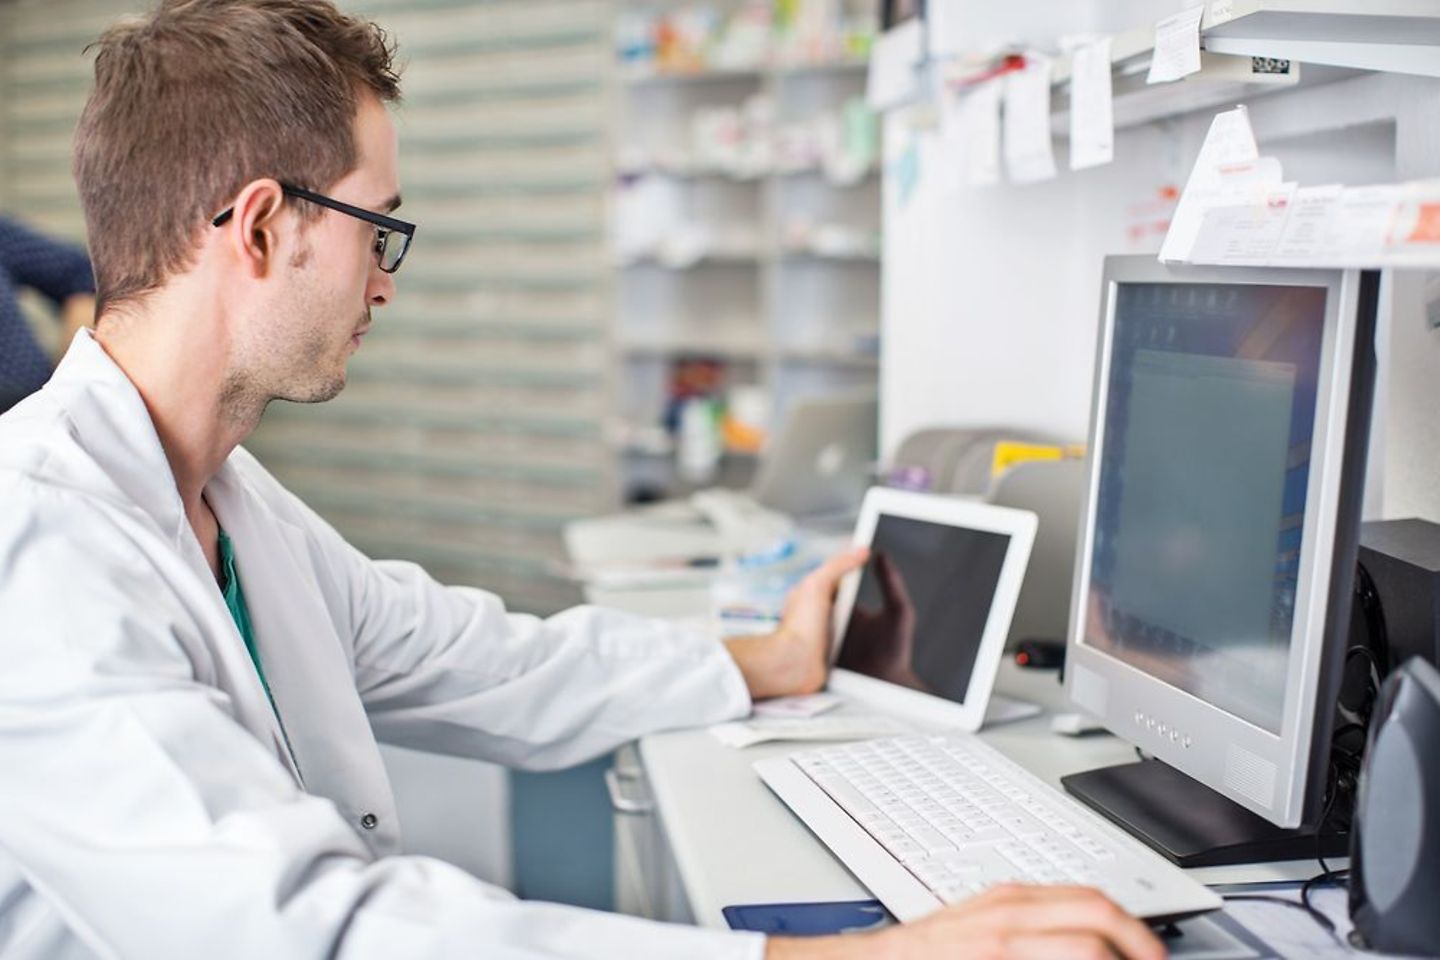 Man in lab coat works on computer and tablet